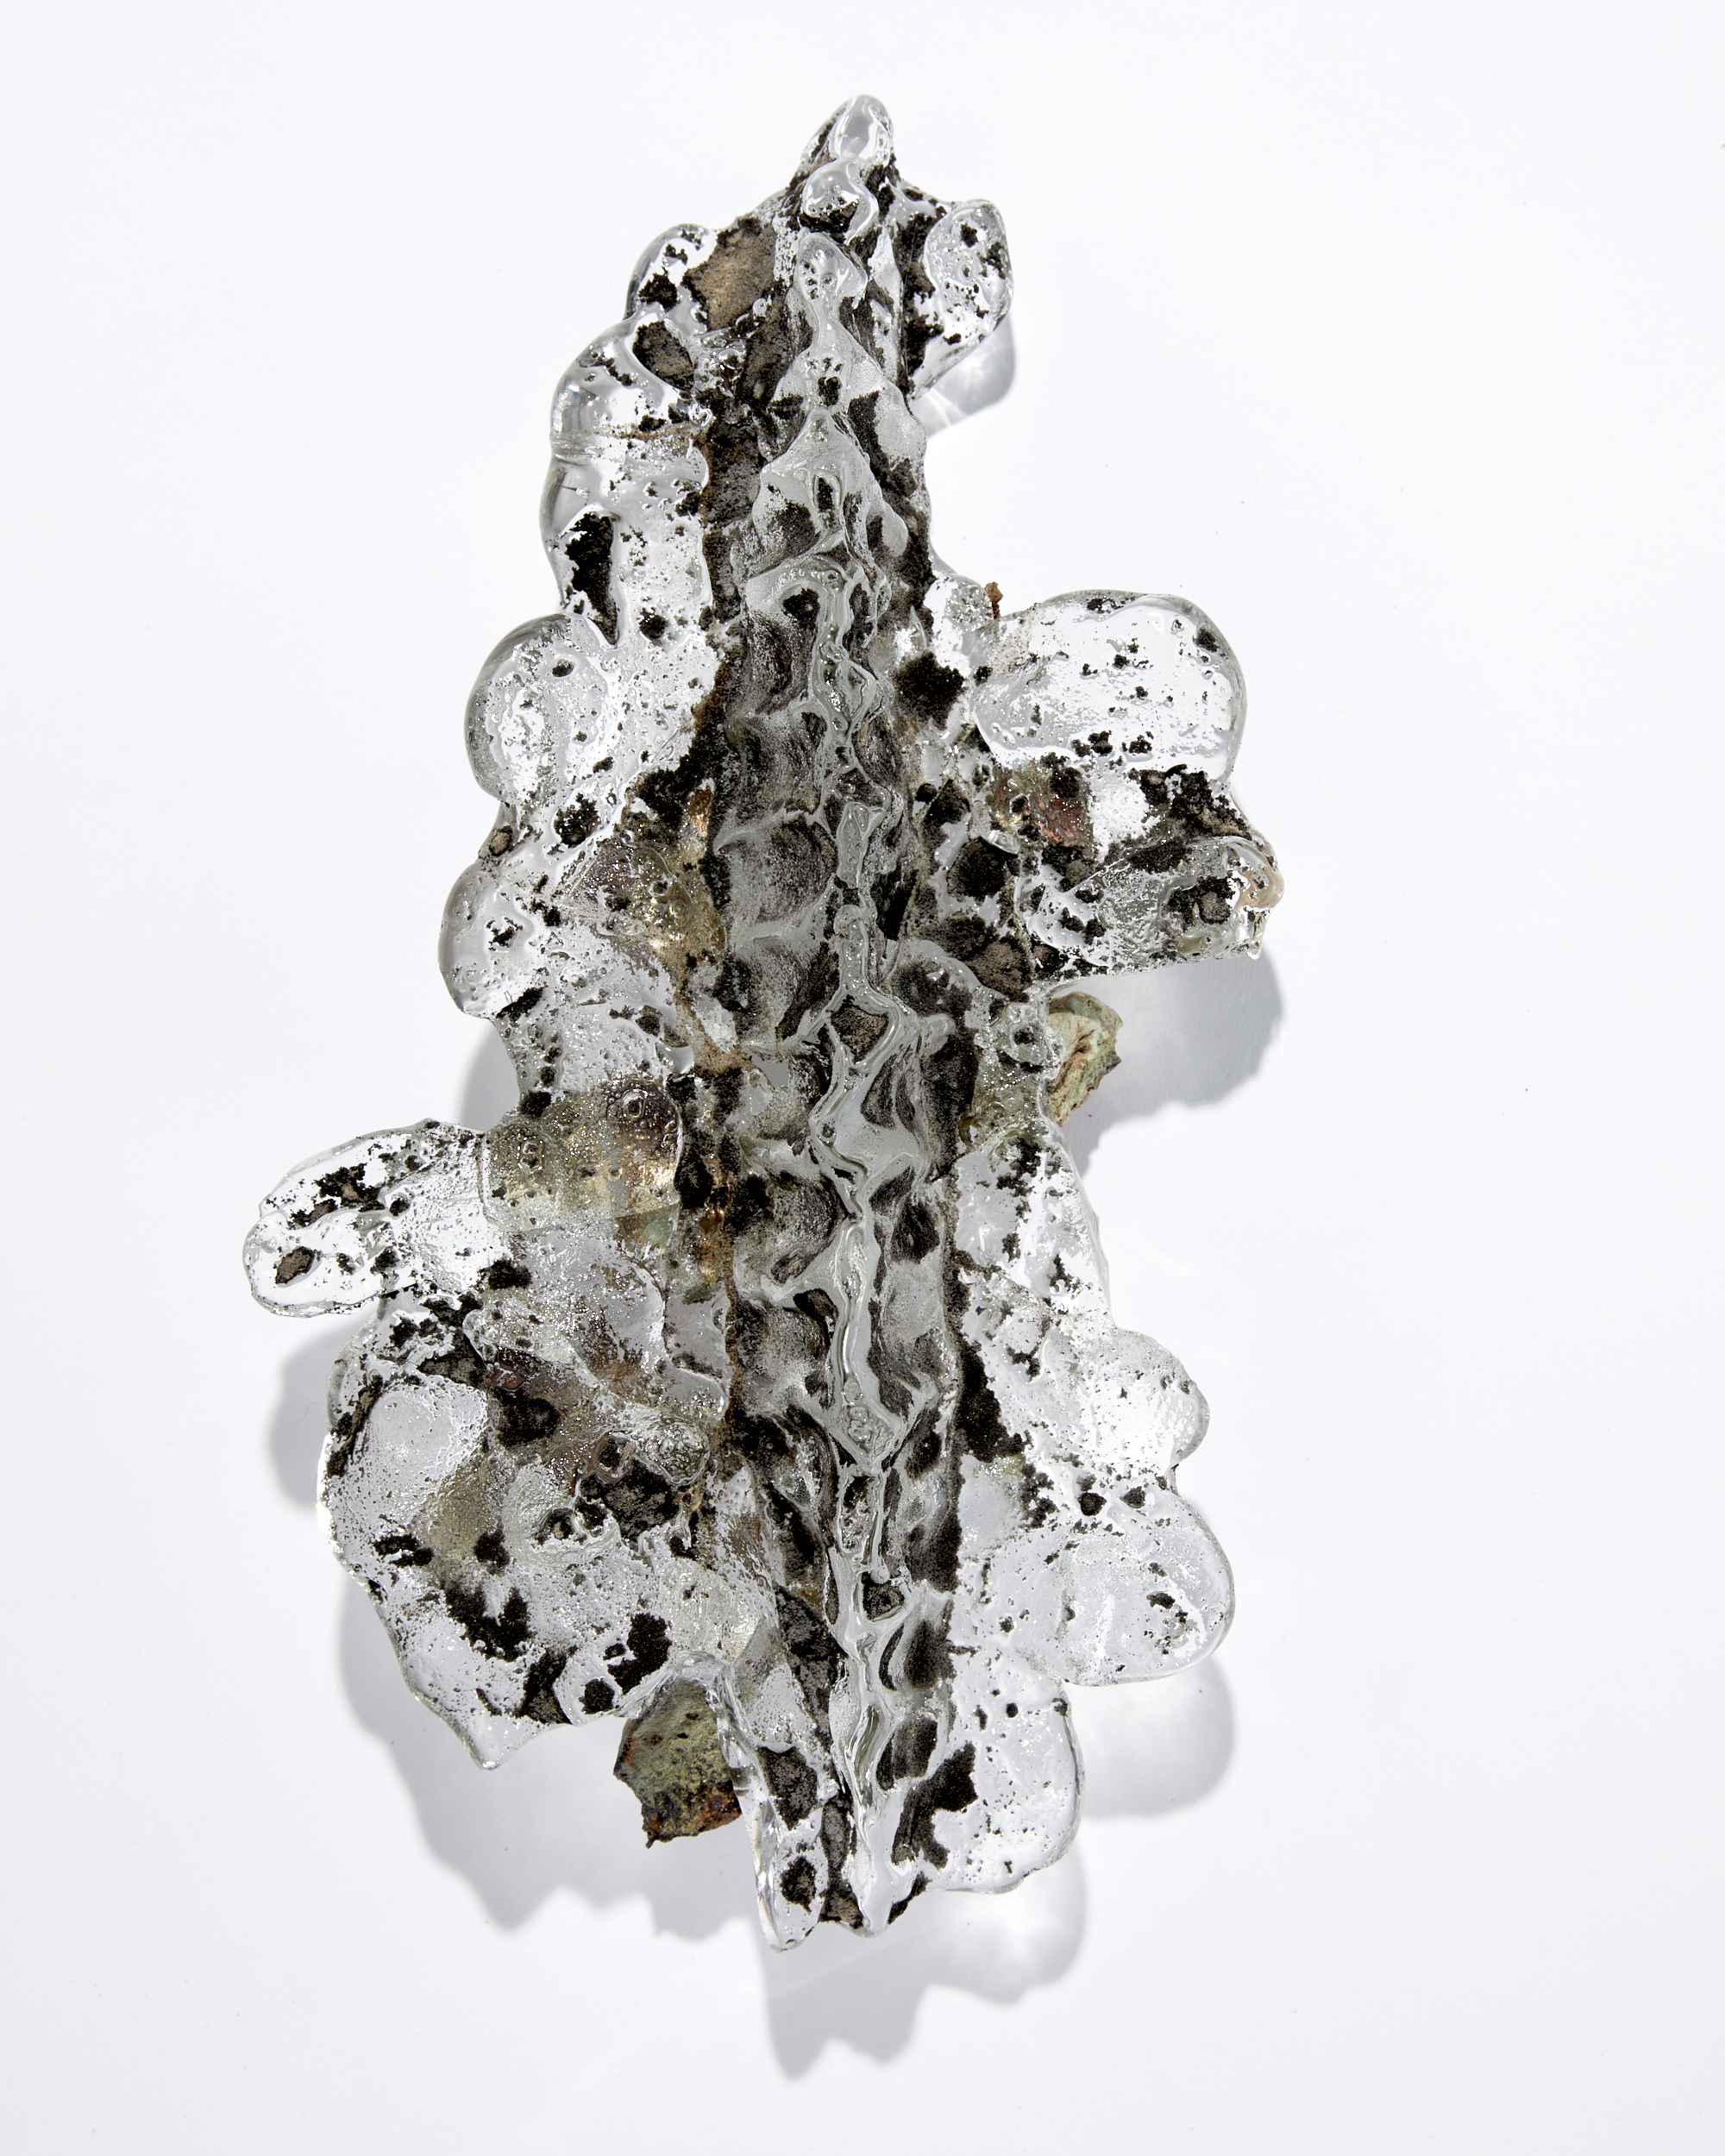 New Relics: Poured Glass Spine Geode